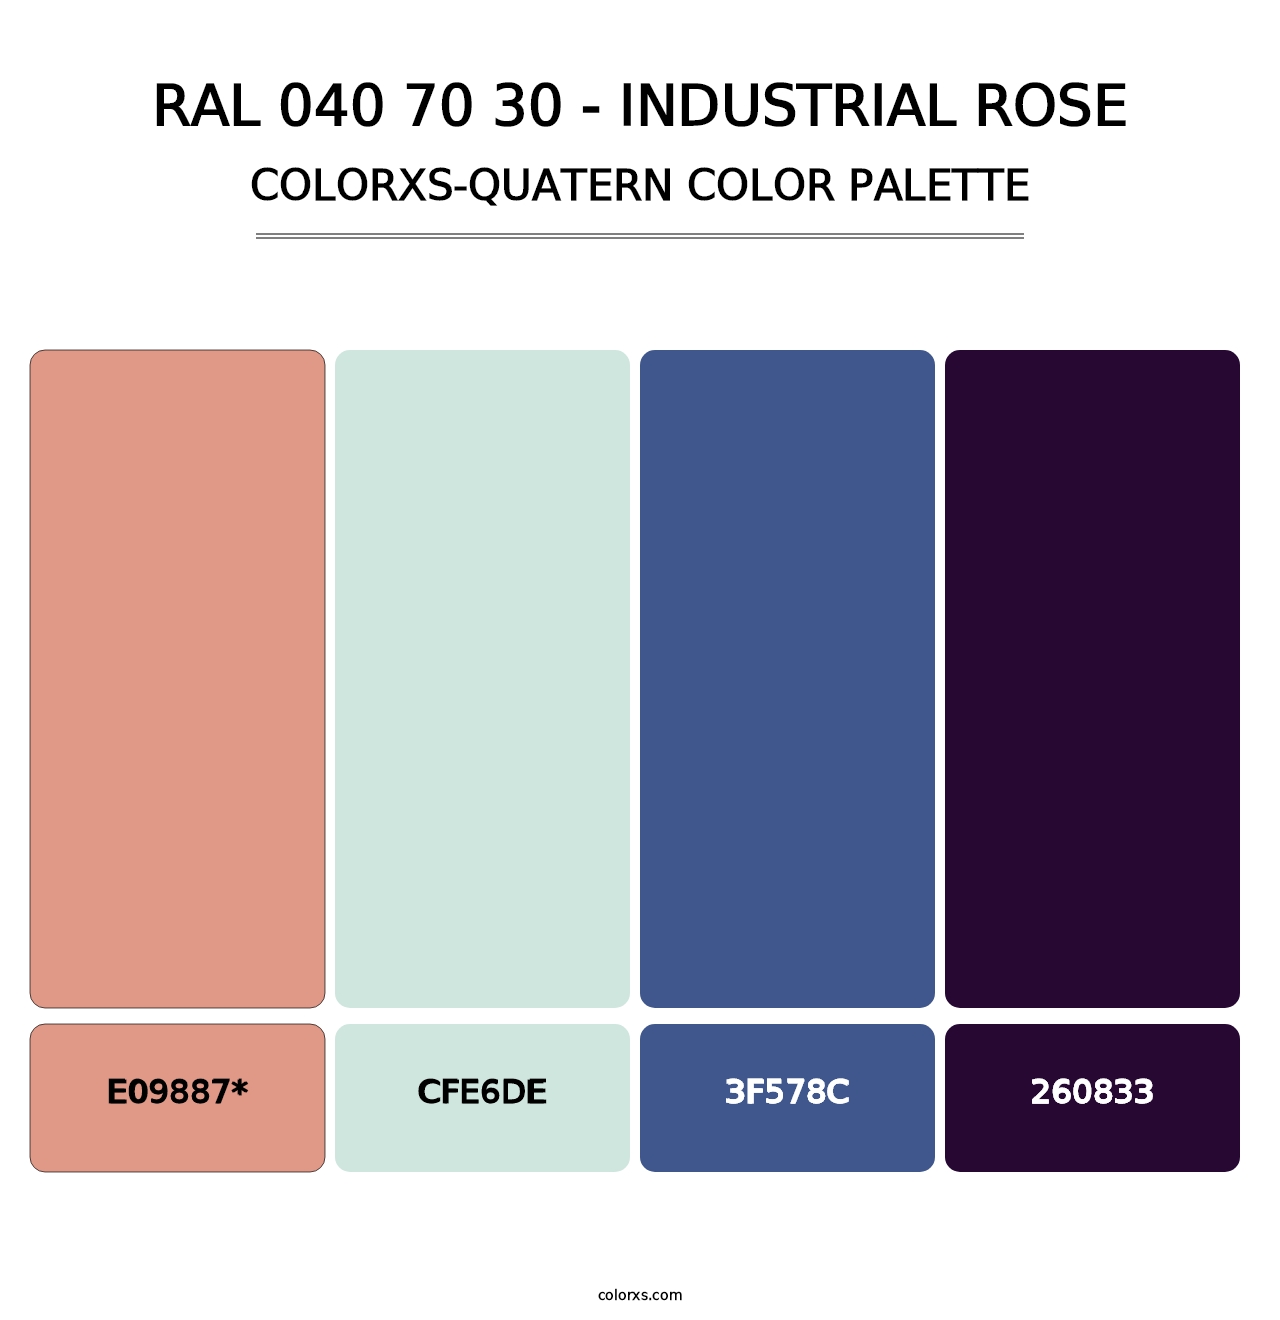 RAL 040 70 30 - Industrial Rose - Colorxs Quatern Palette